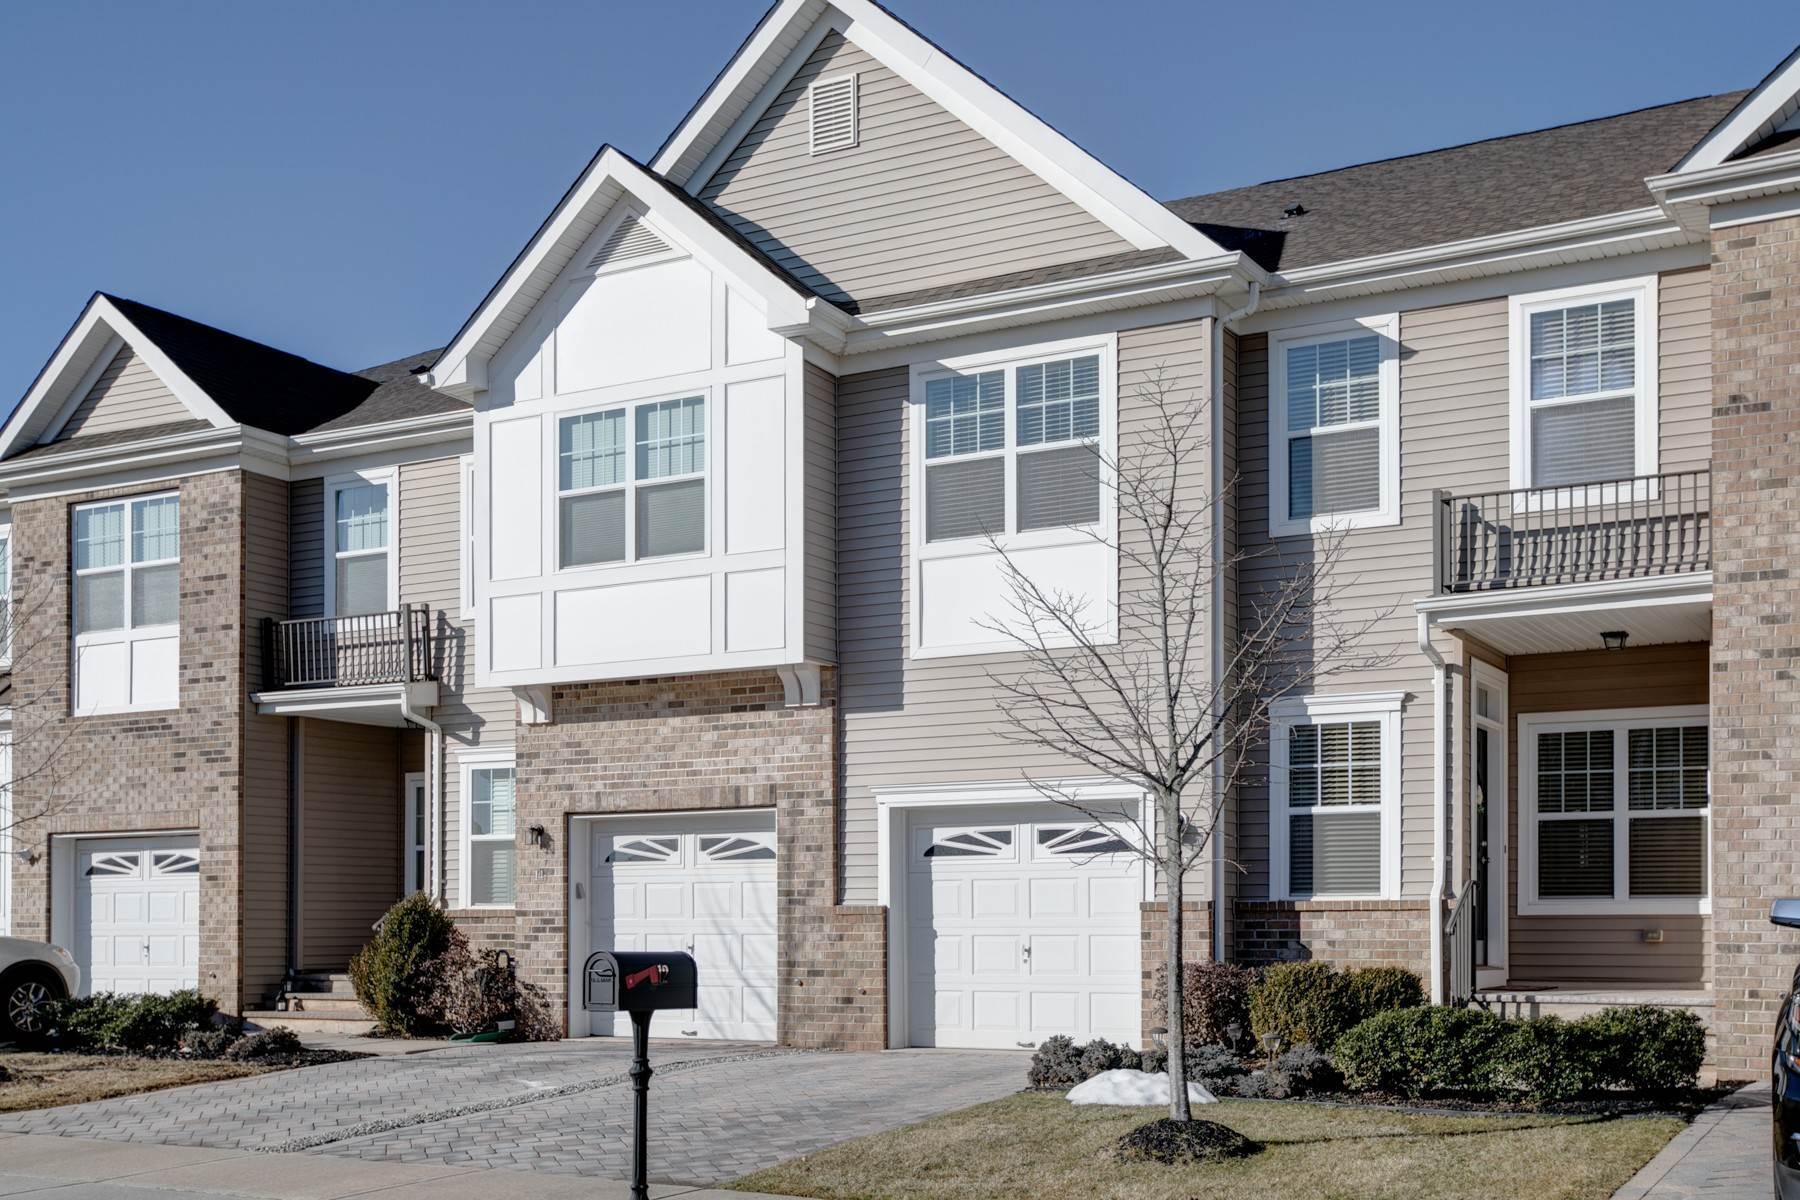 Townhouse for Sale at Beautiful Townhome in Summerfields Community 12 Shadowlawn Drive Franklin Township, New Jersey 08873 United States